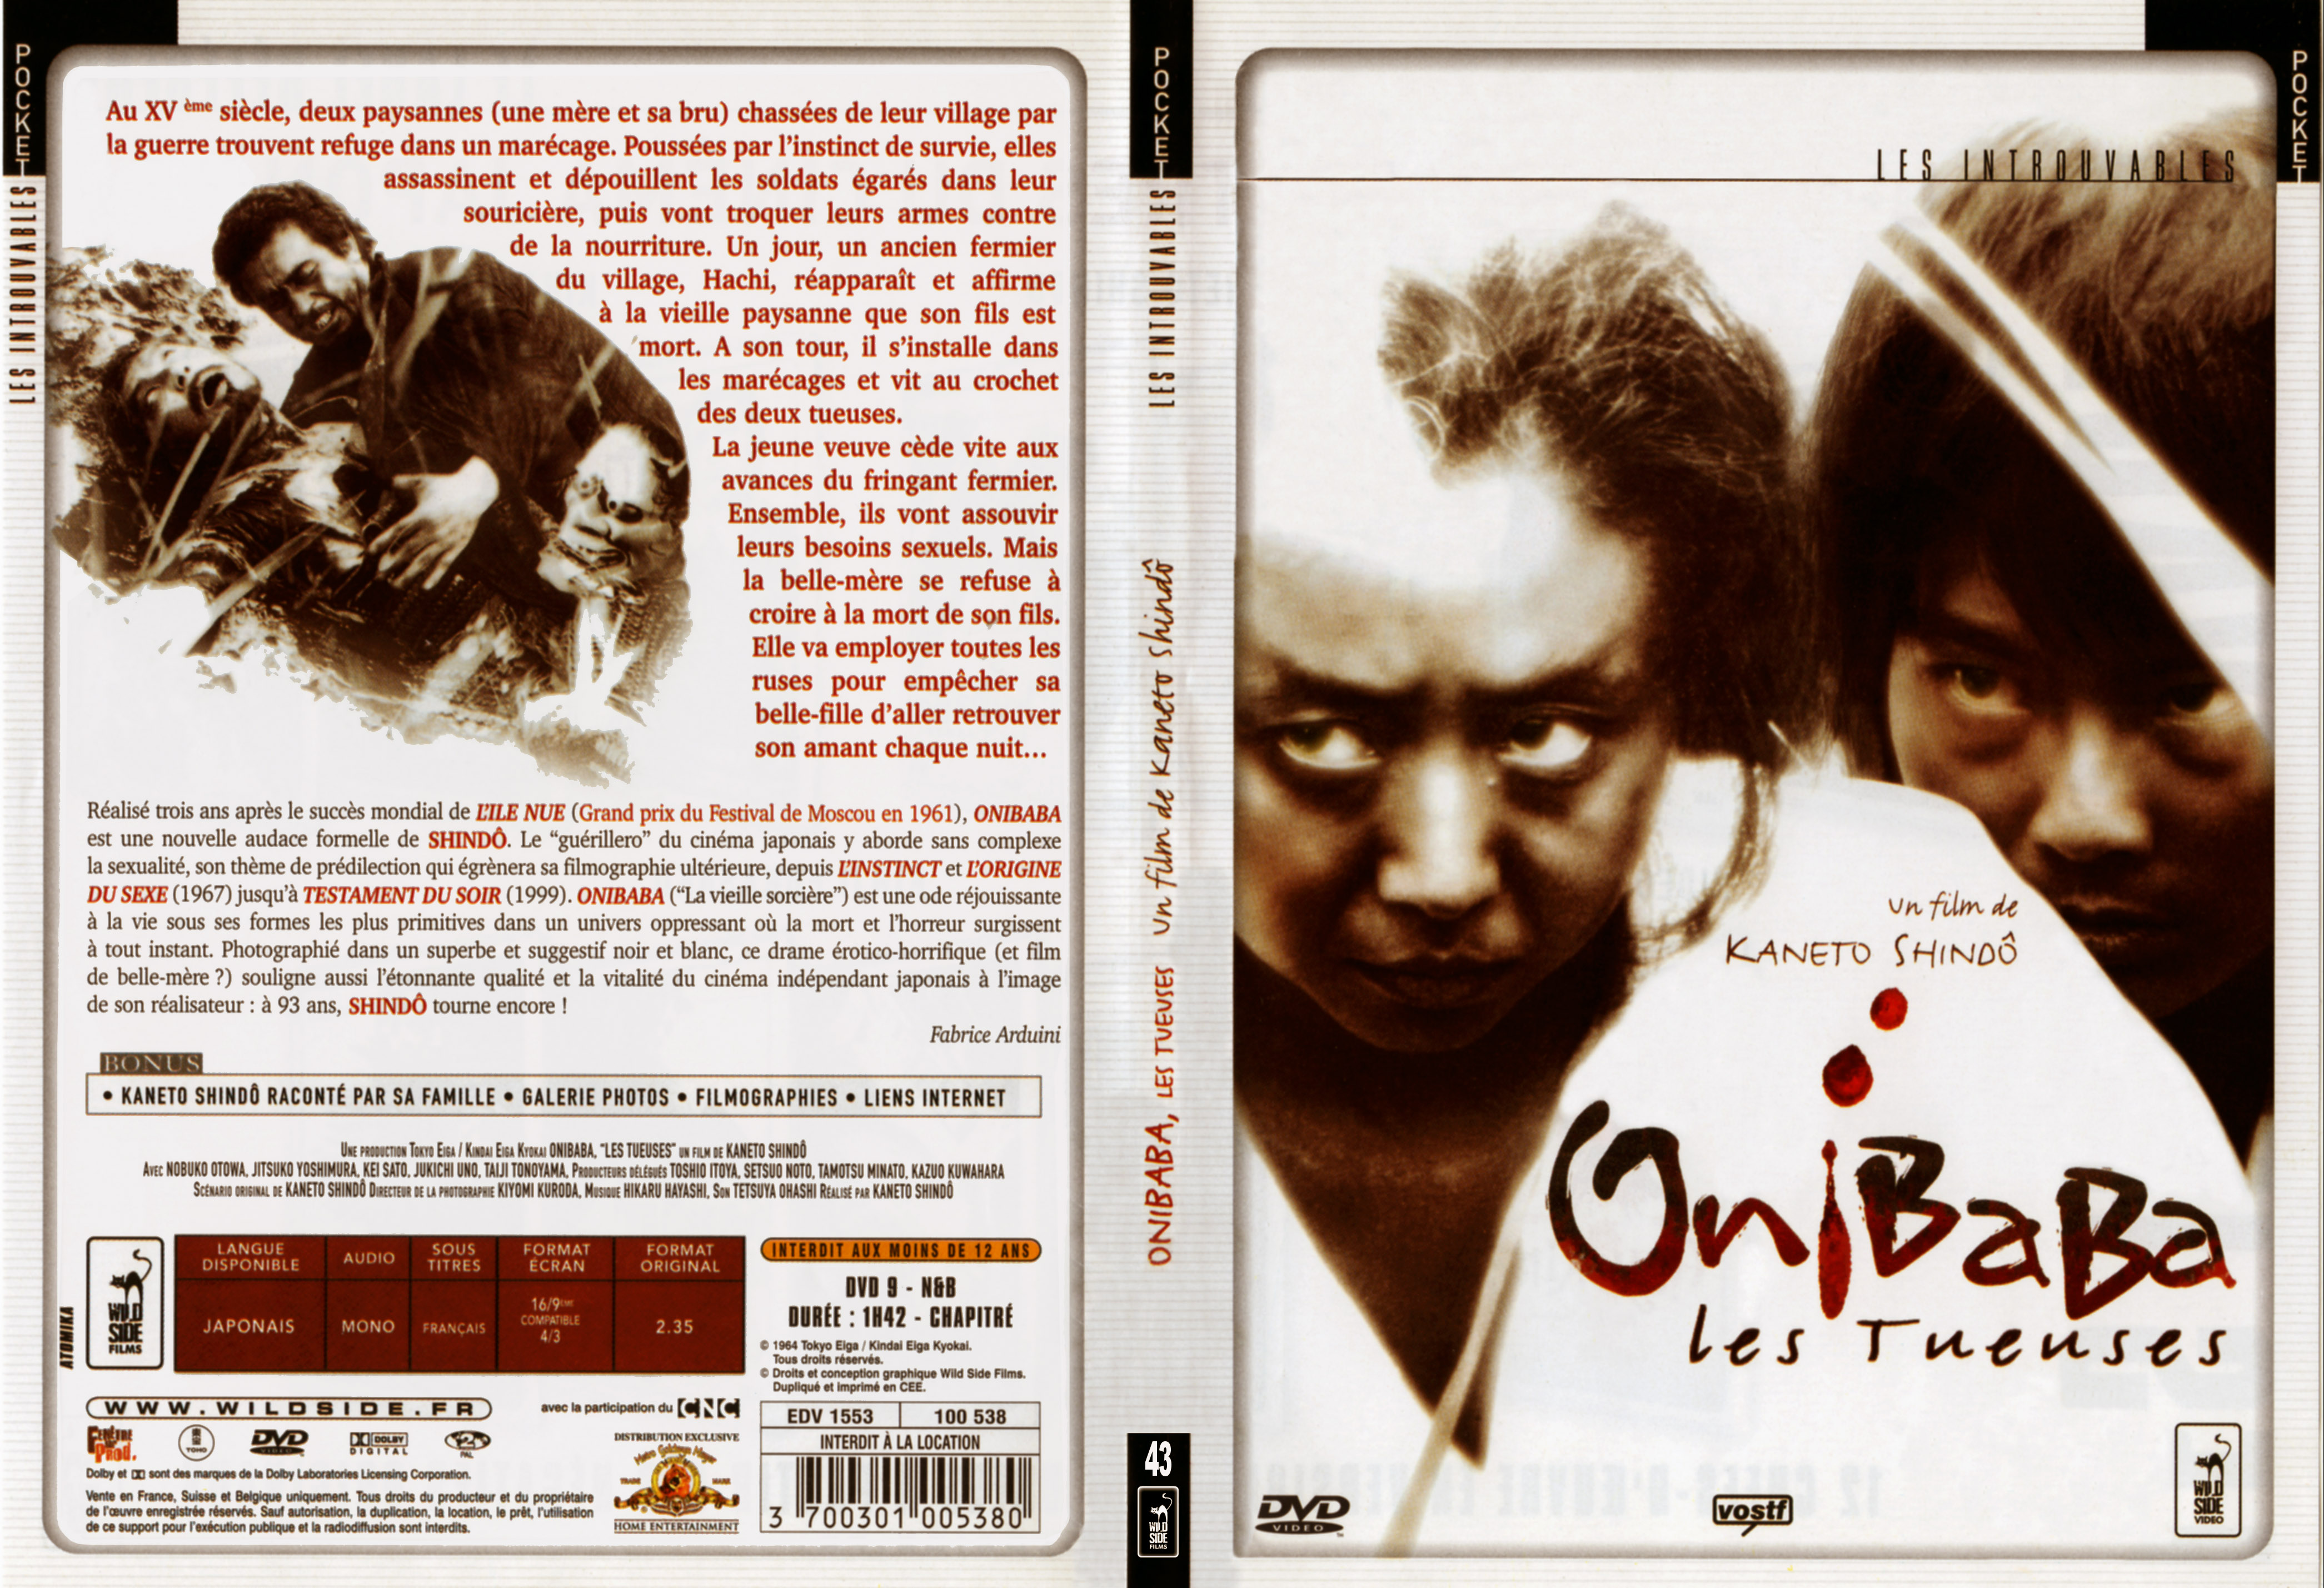 Jaquette DVD Onibaba